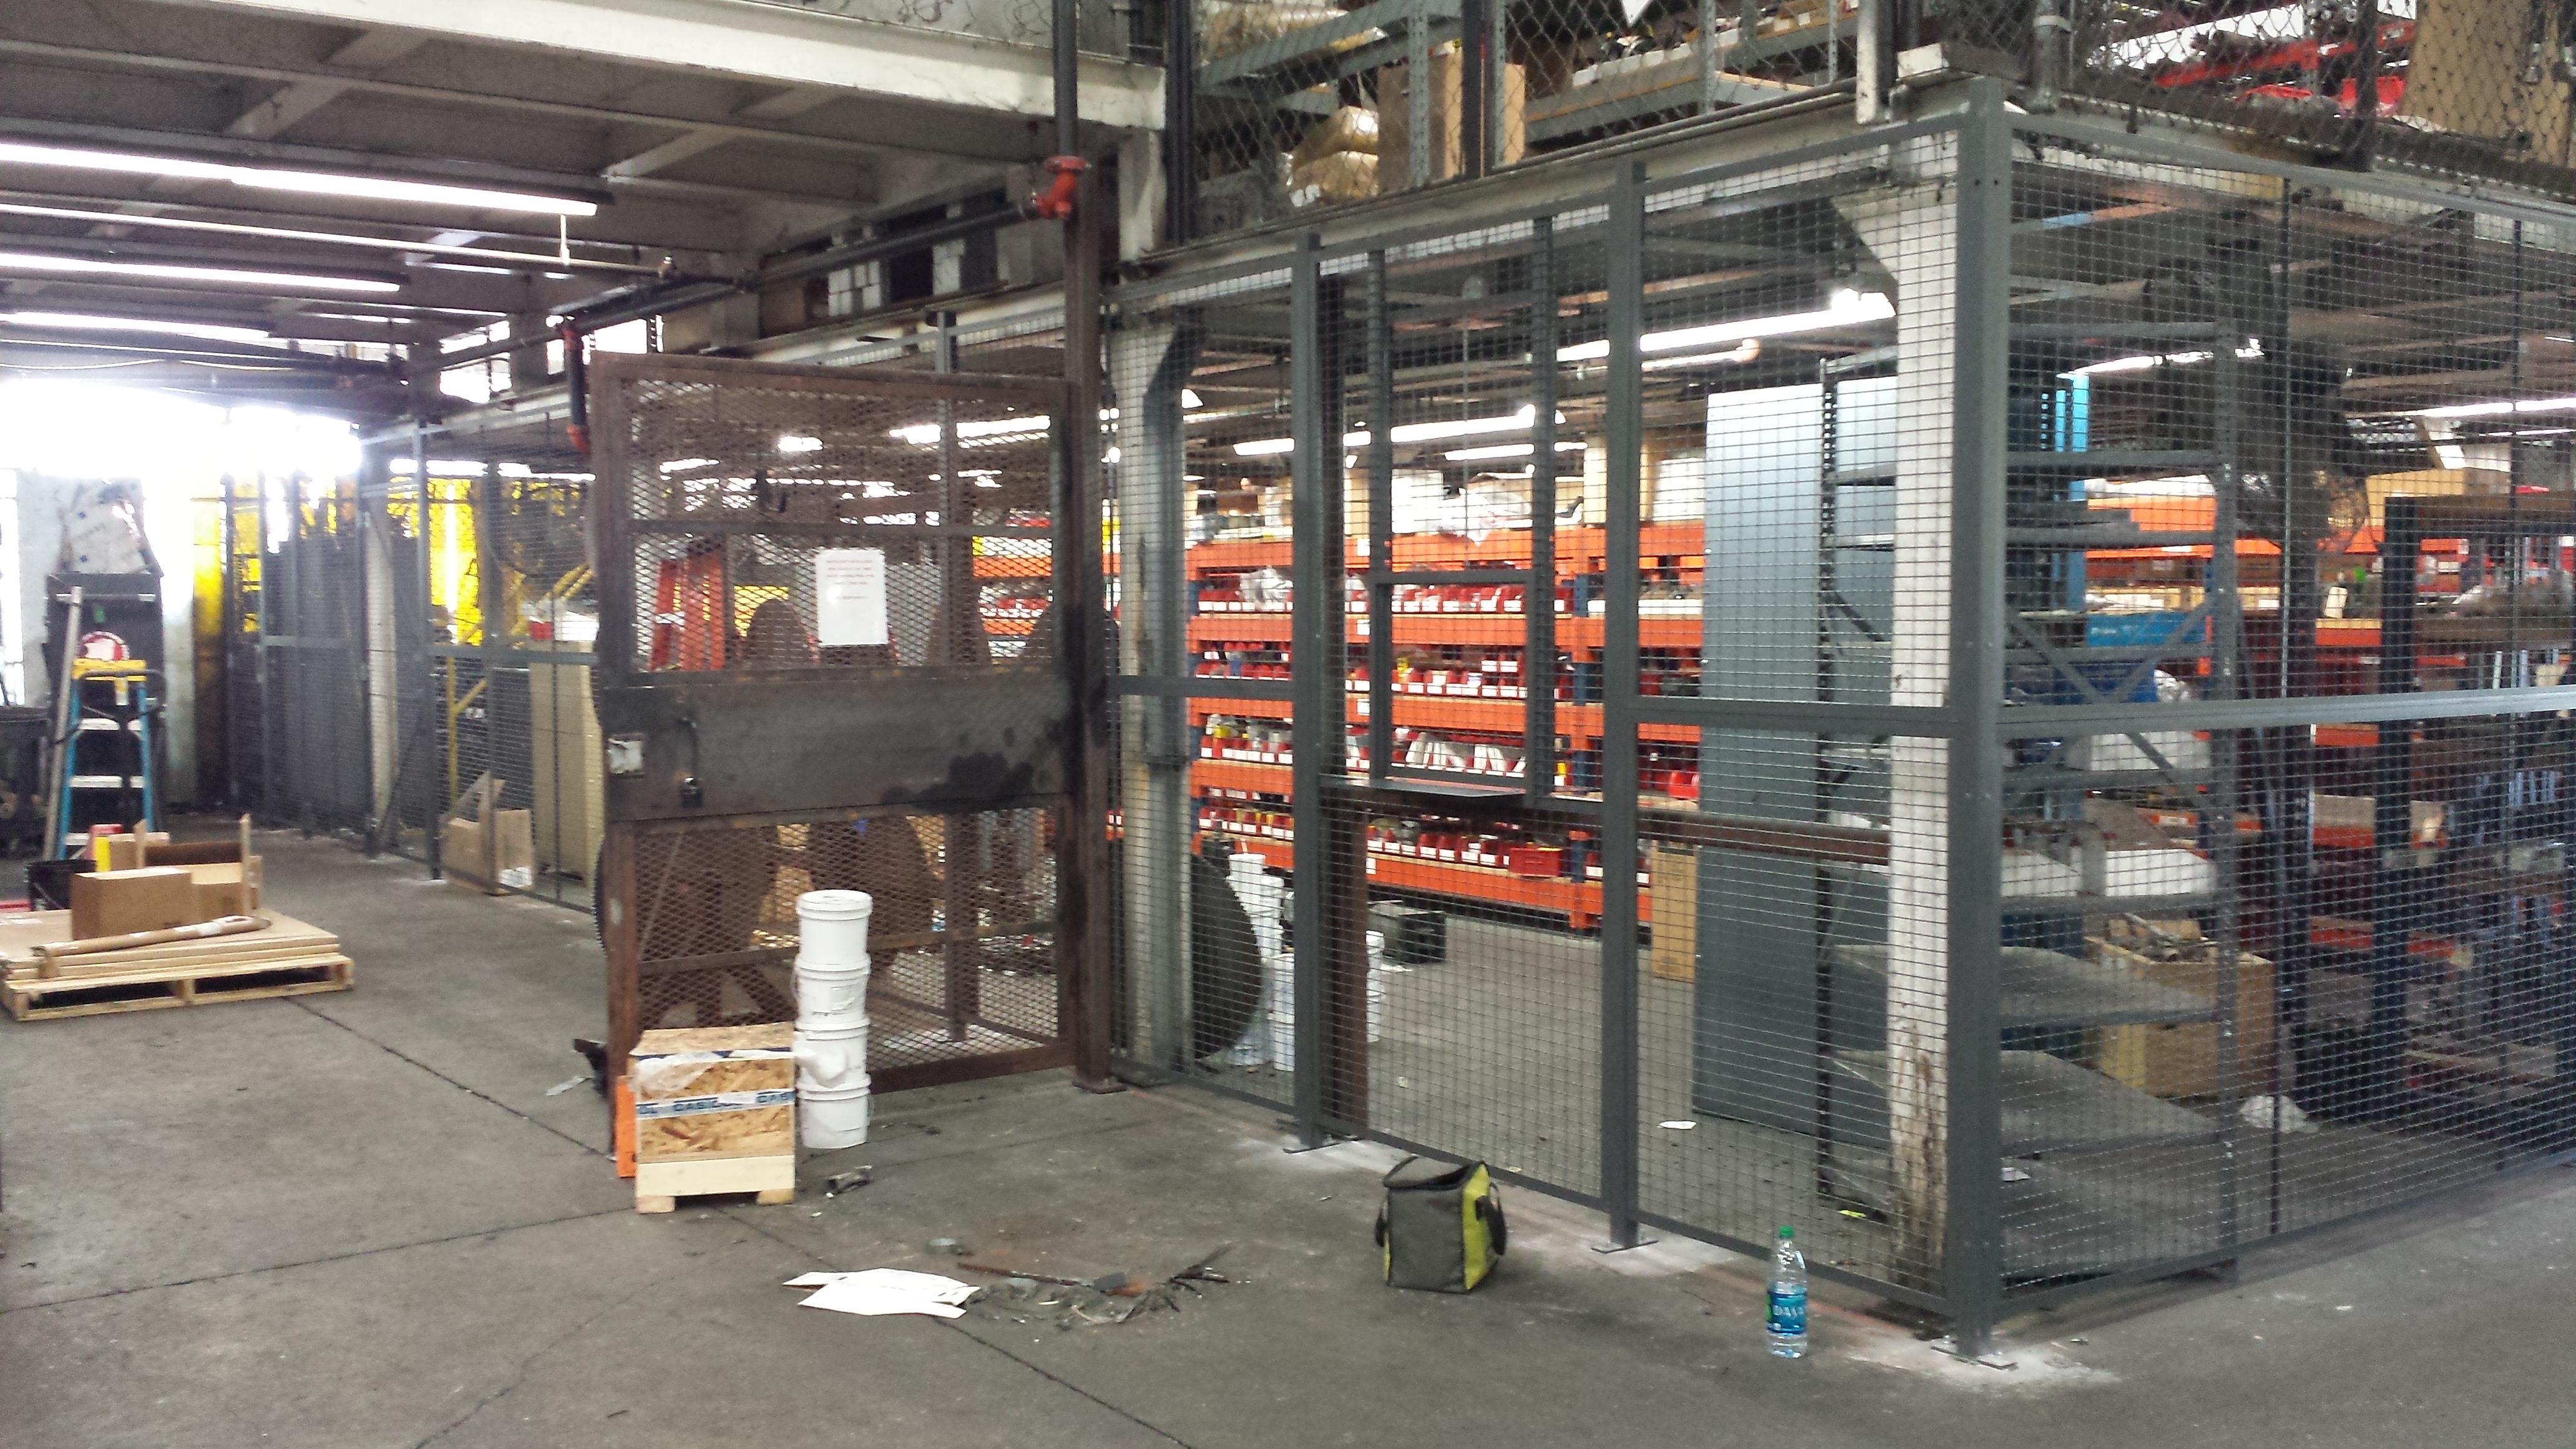 Wire Cages offer Warehouse Security for Parts and Inventory